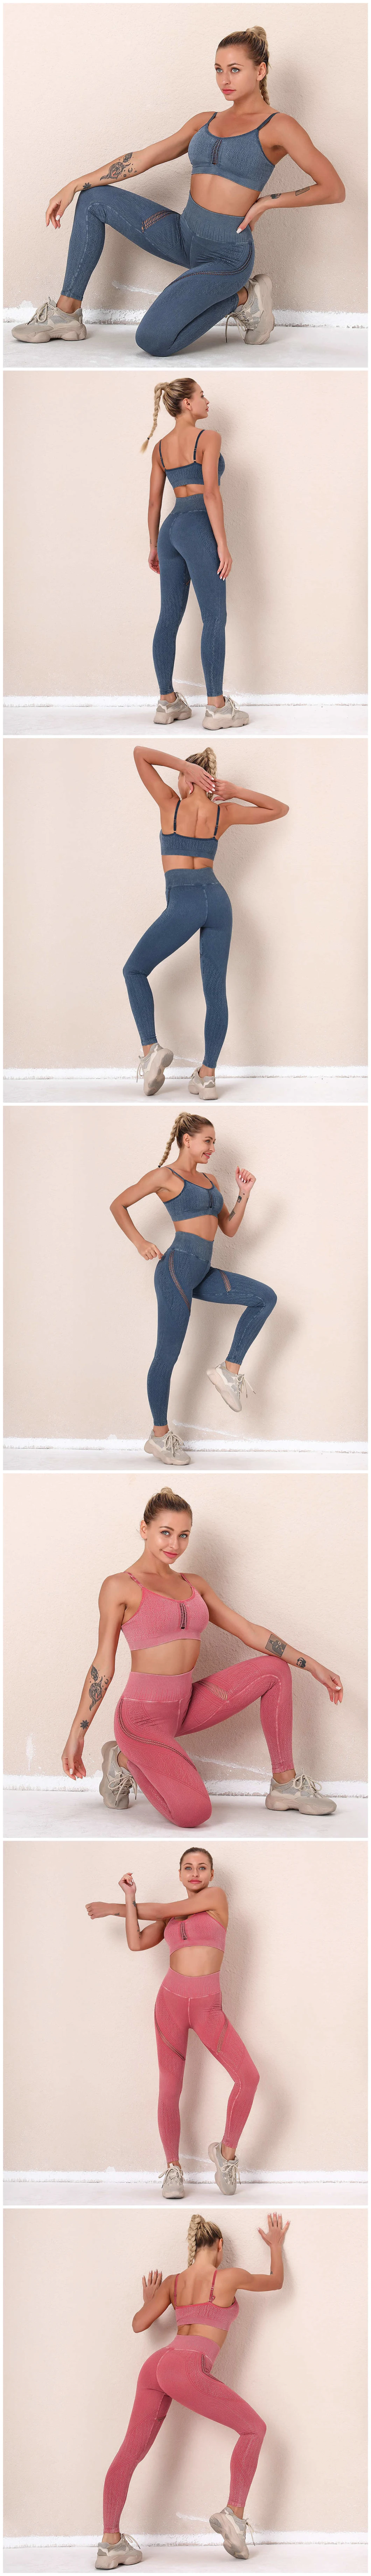 Wholesale Sportswear Fitness Clothing High Waisted Workout Hollow out Tights Woman Gym Leggings Seamless Yoga Pants